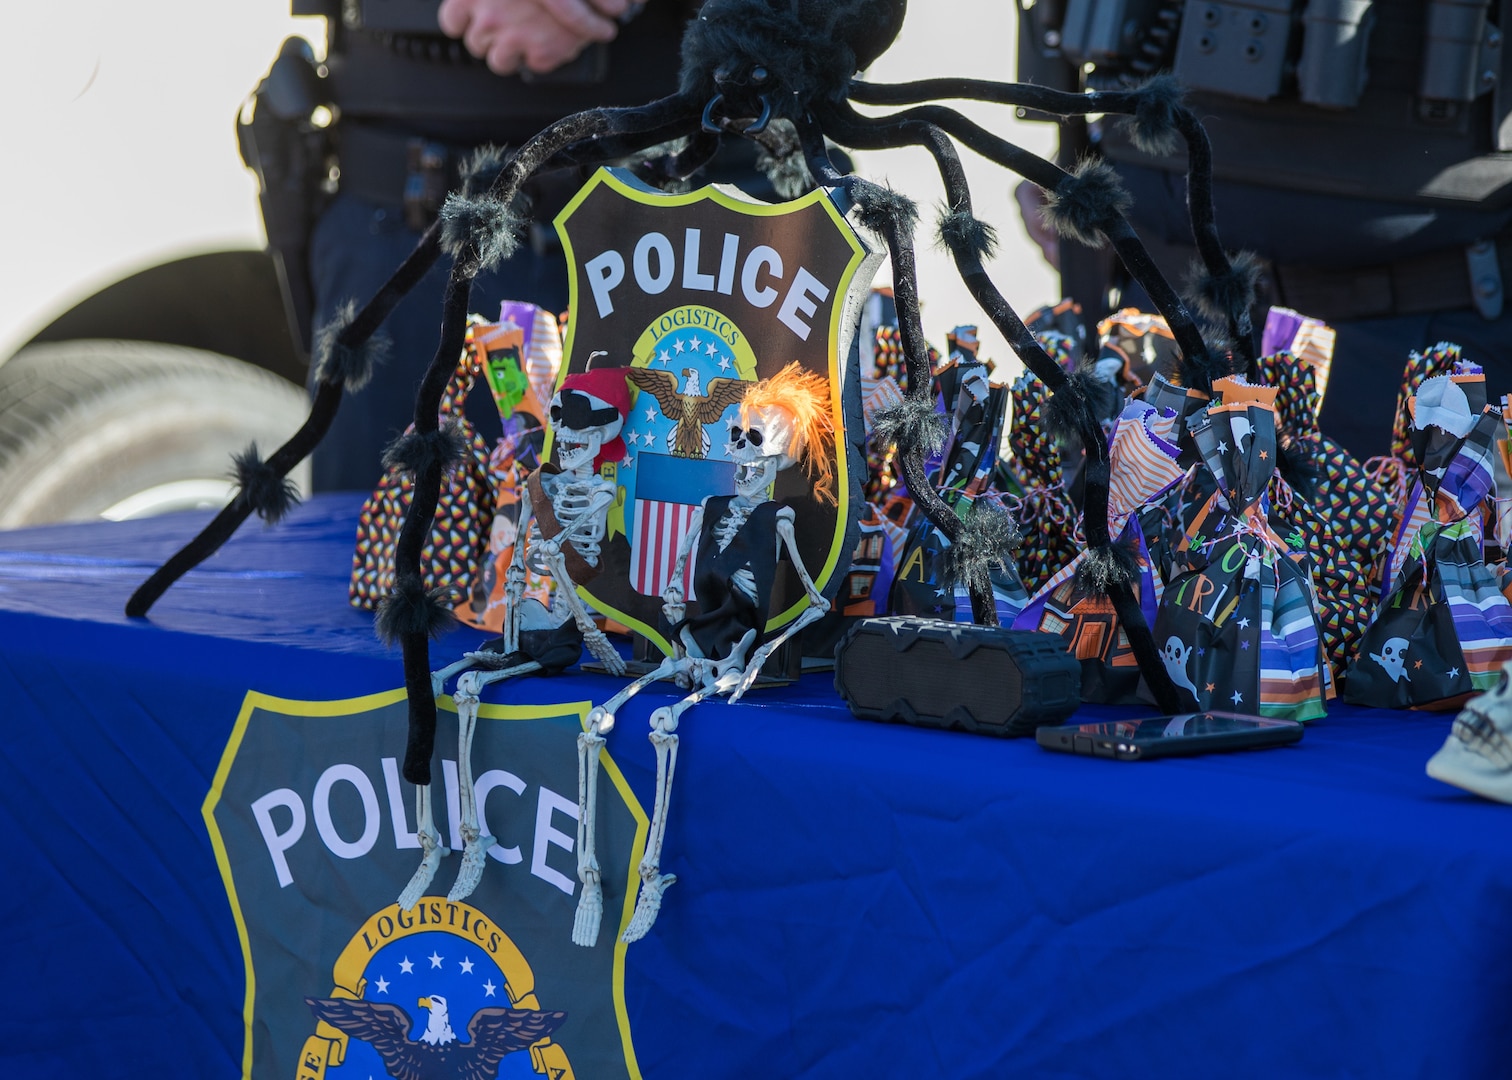 A table with a blue tablecloth with the DSCC/DLA Police logo on it with treat bags on top. The logo is flanked by mini skeletons.